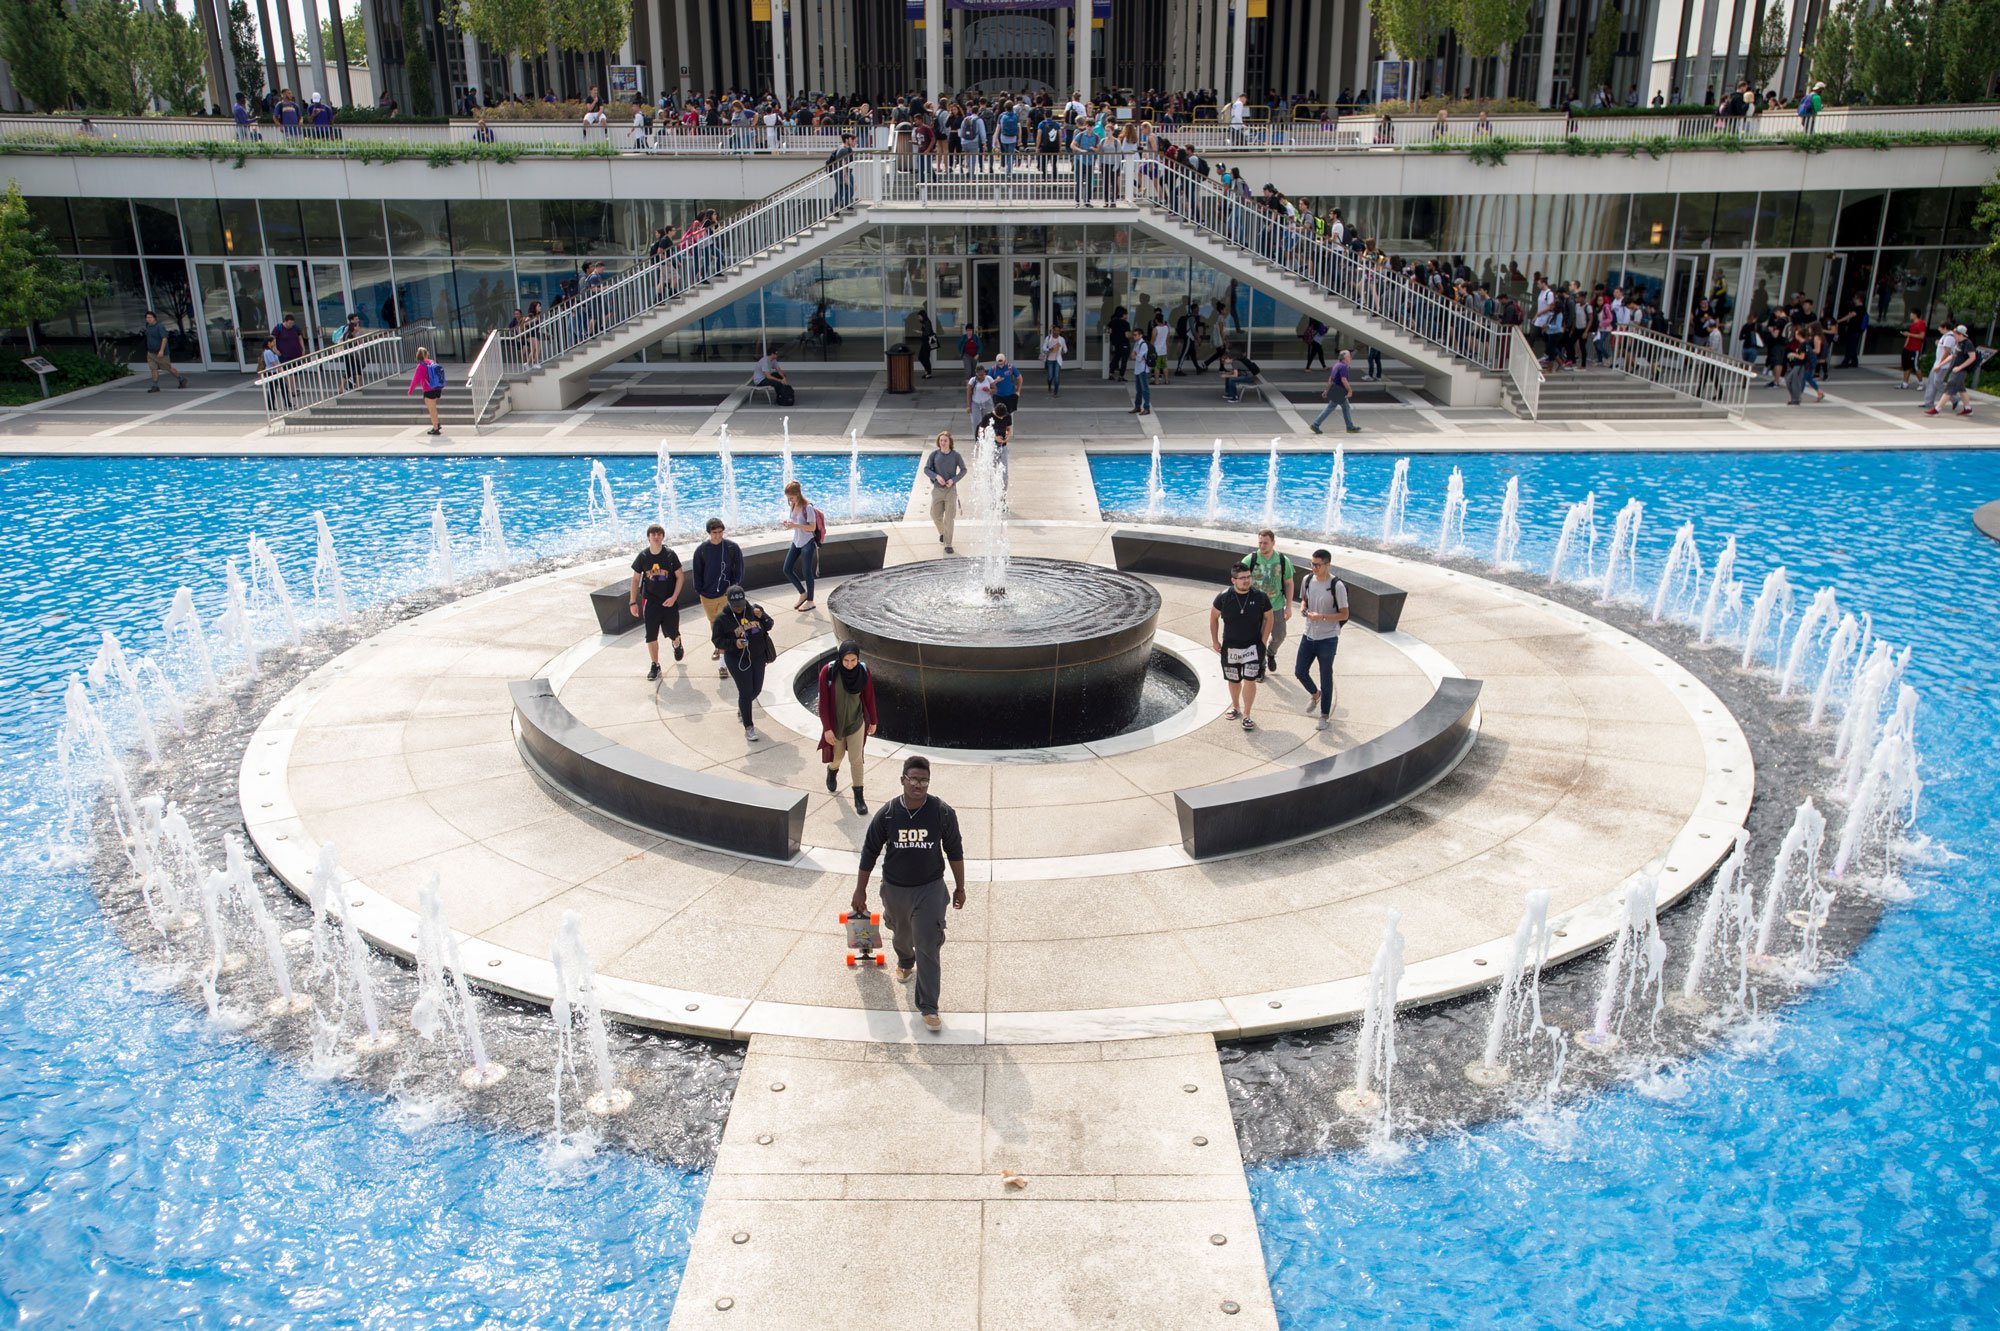 Students walk on a pathway surrounded by a large fountain in the center of campus